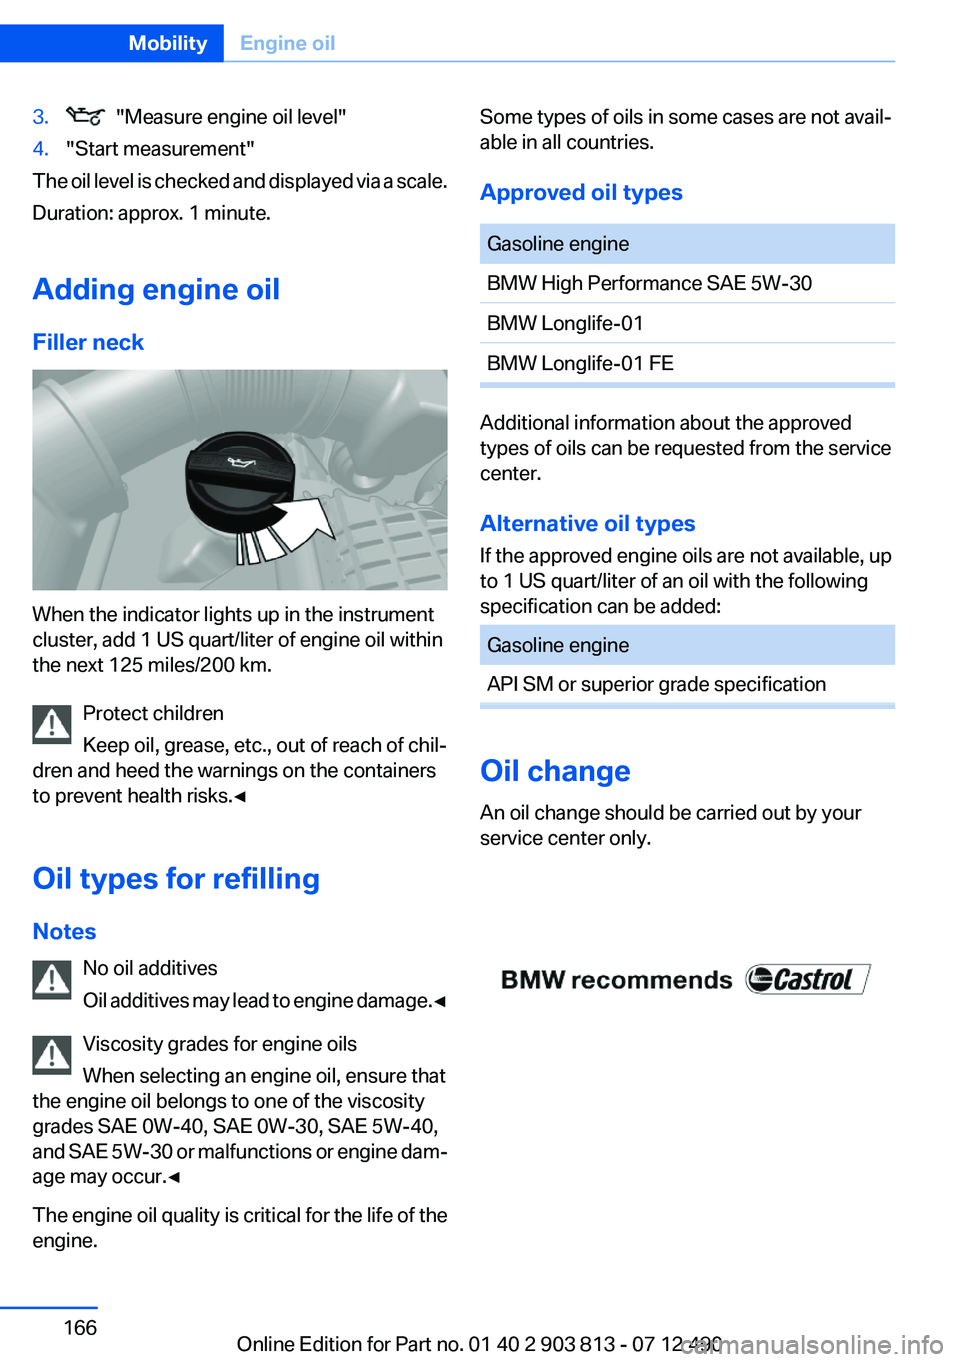 BMW X3 XDRIVE 28I 2013  Owners Manual 3.  "Measure engine oil level"4."Start measurement"
The oil level is checked and displayed via a scale.
Duration: approx. 1 minute.
Adding engine oil
Filler neck
When the indicator lig